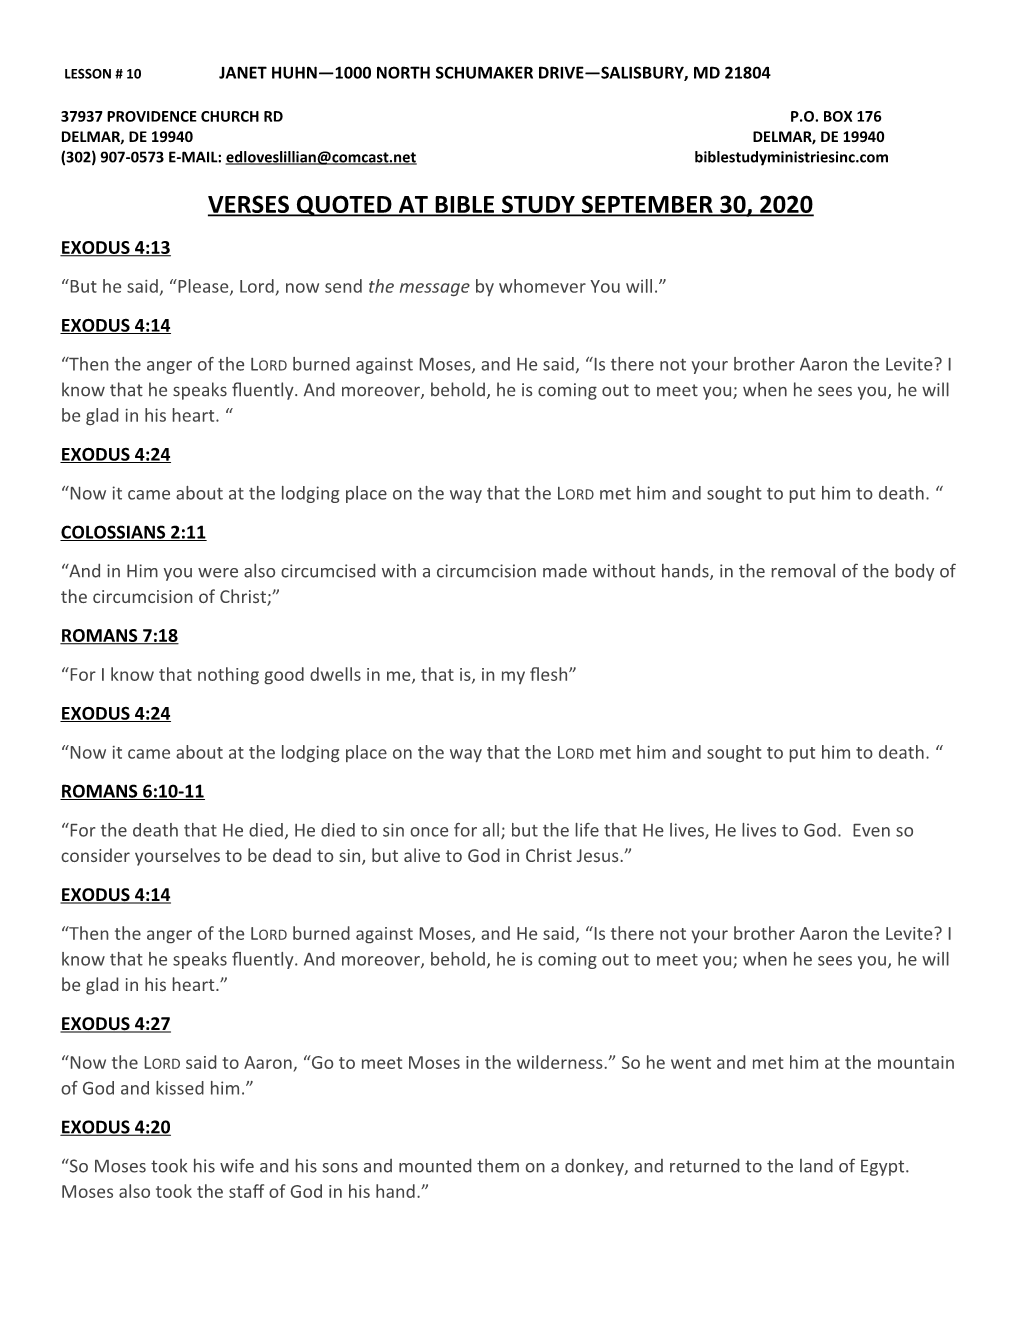 VERSES QUOTED at BIBLE STUDY SEPTEMBER 30, 2020 EXODUS 4:13 “But He Said, “Please, Lord, Now Send the Message by Whomever You Will.” EXODUS 4:14